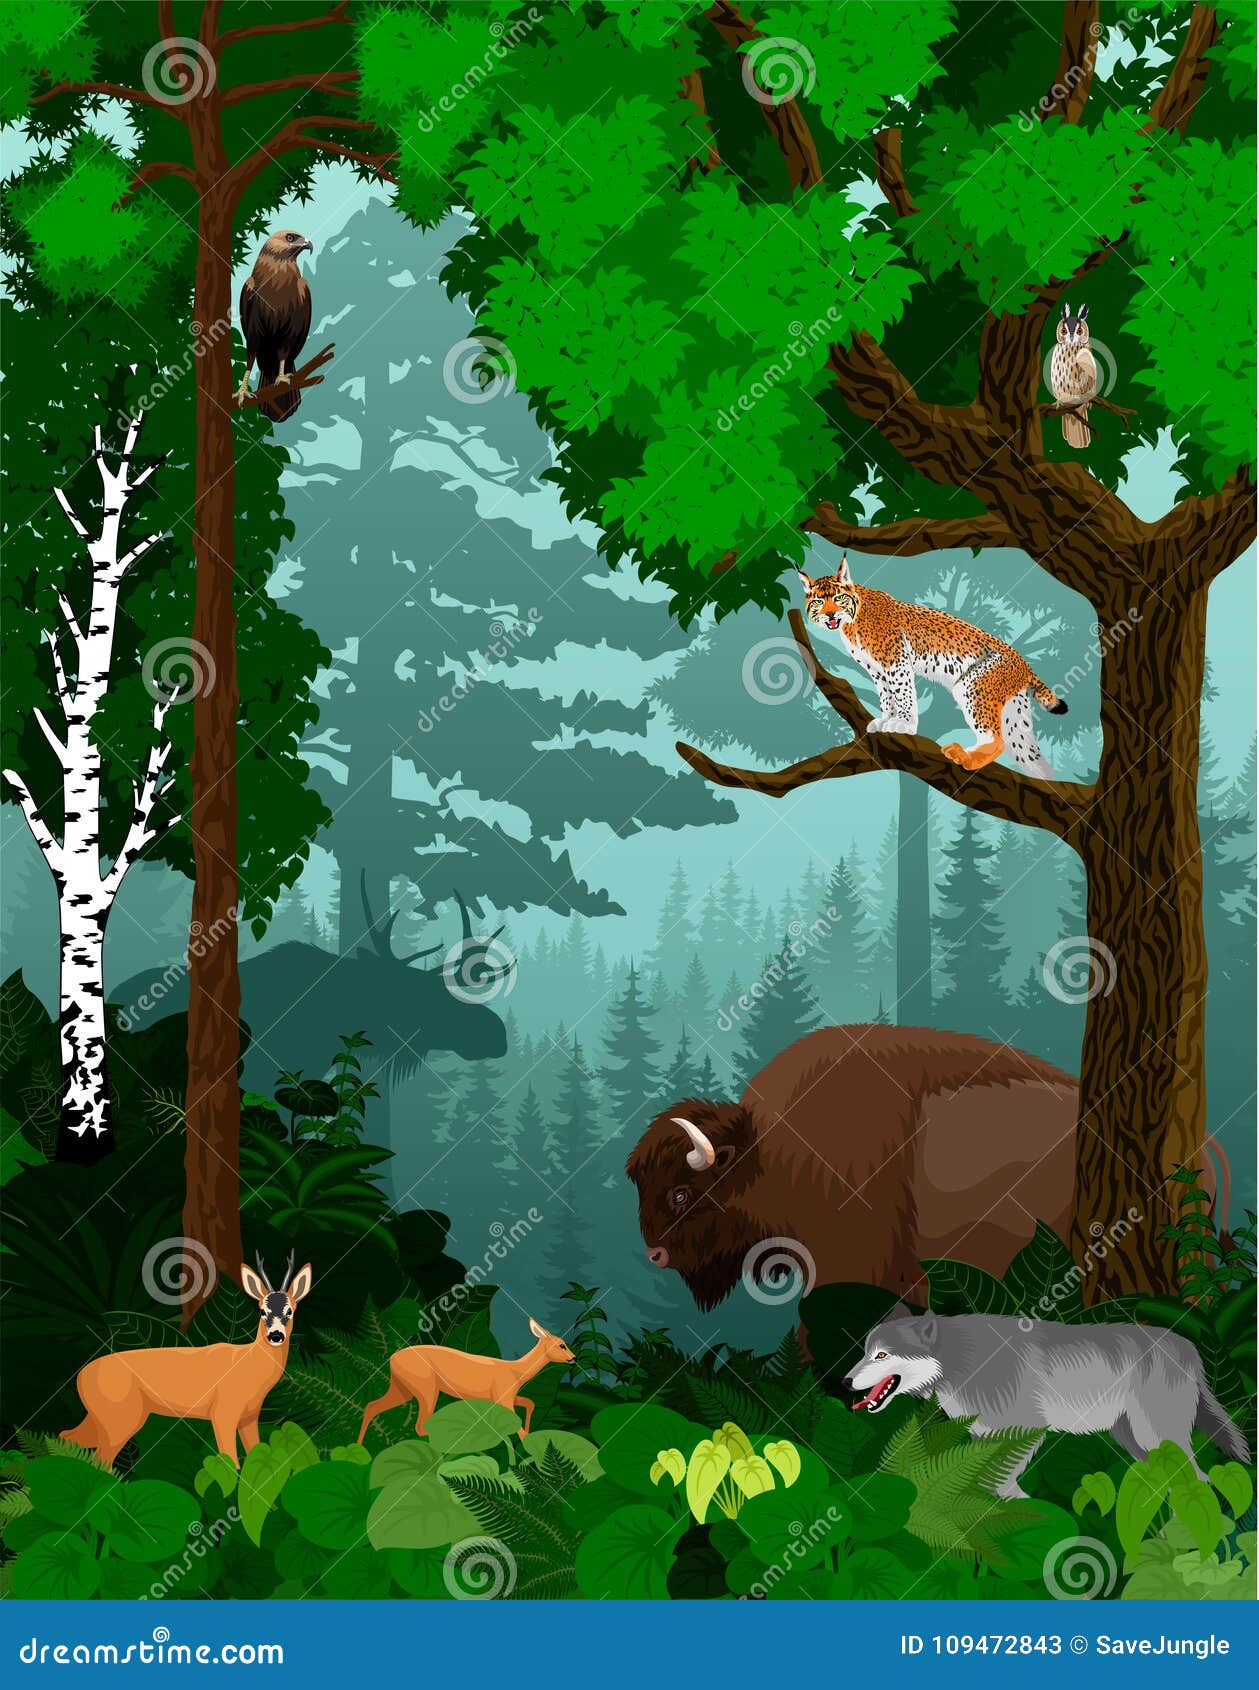  woodland green forest trees backlit with bison, wolf, lynx, owl, moose and deers